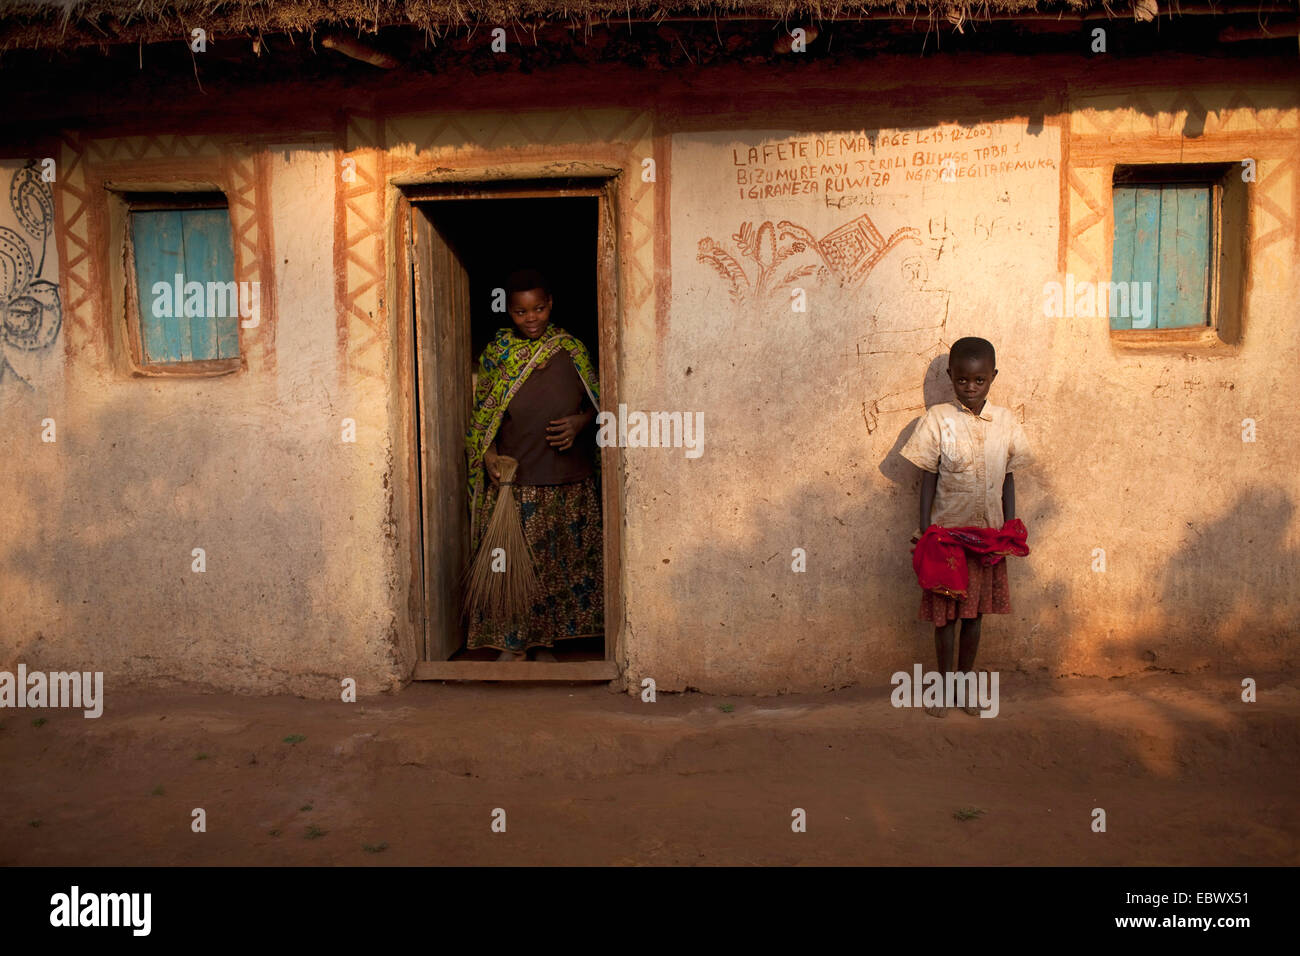 woman with besom standing in entrance, boy leaning against facade, Burundi, Karuzi, Buhiga Stock Photo